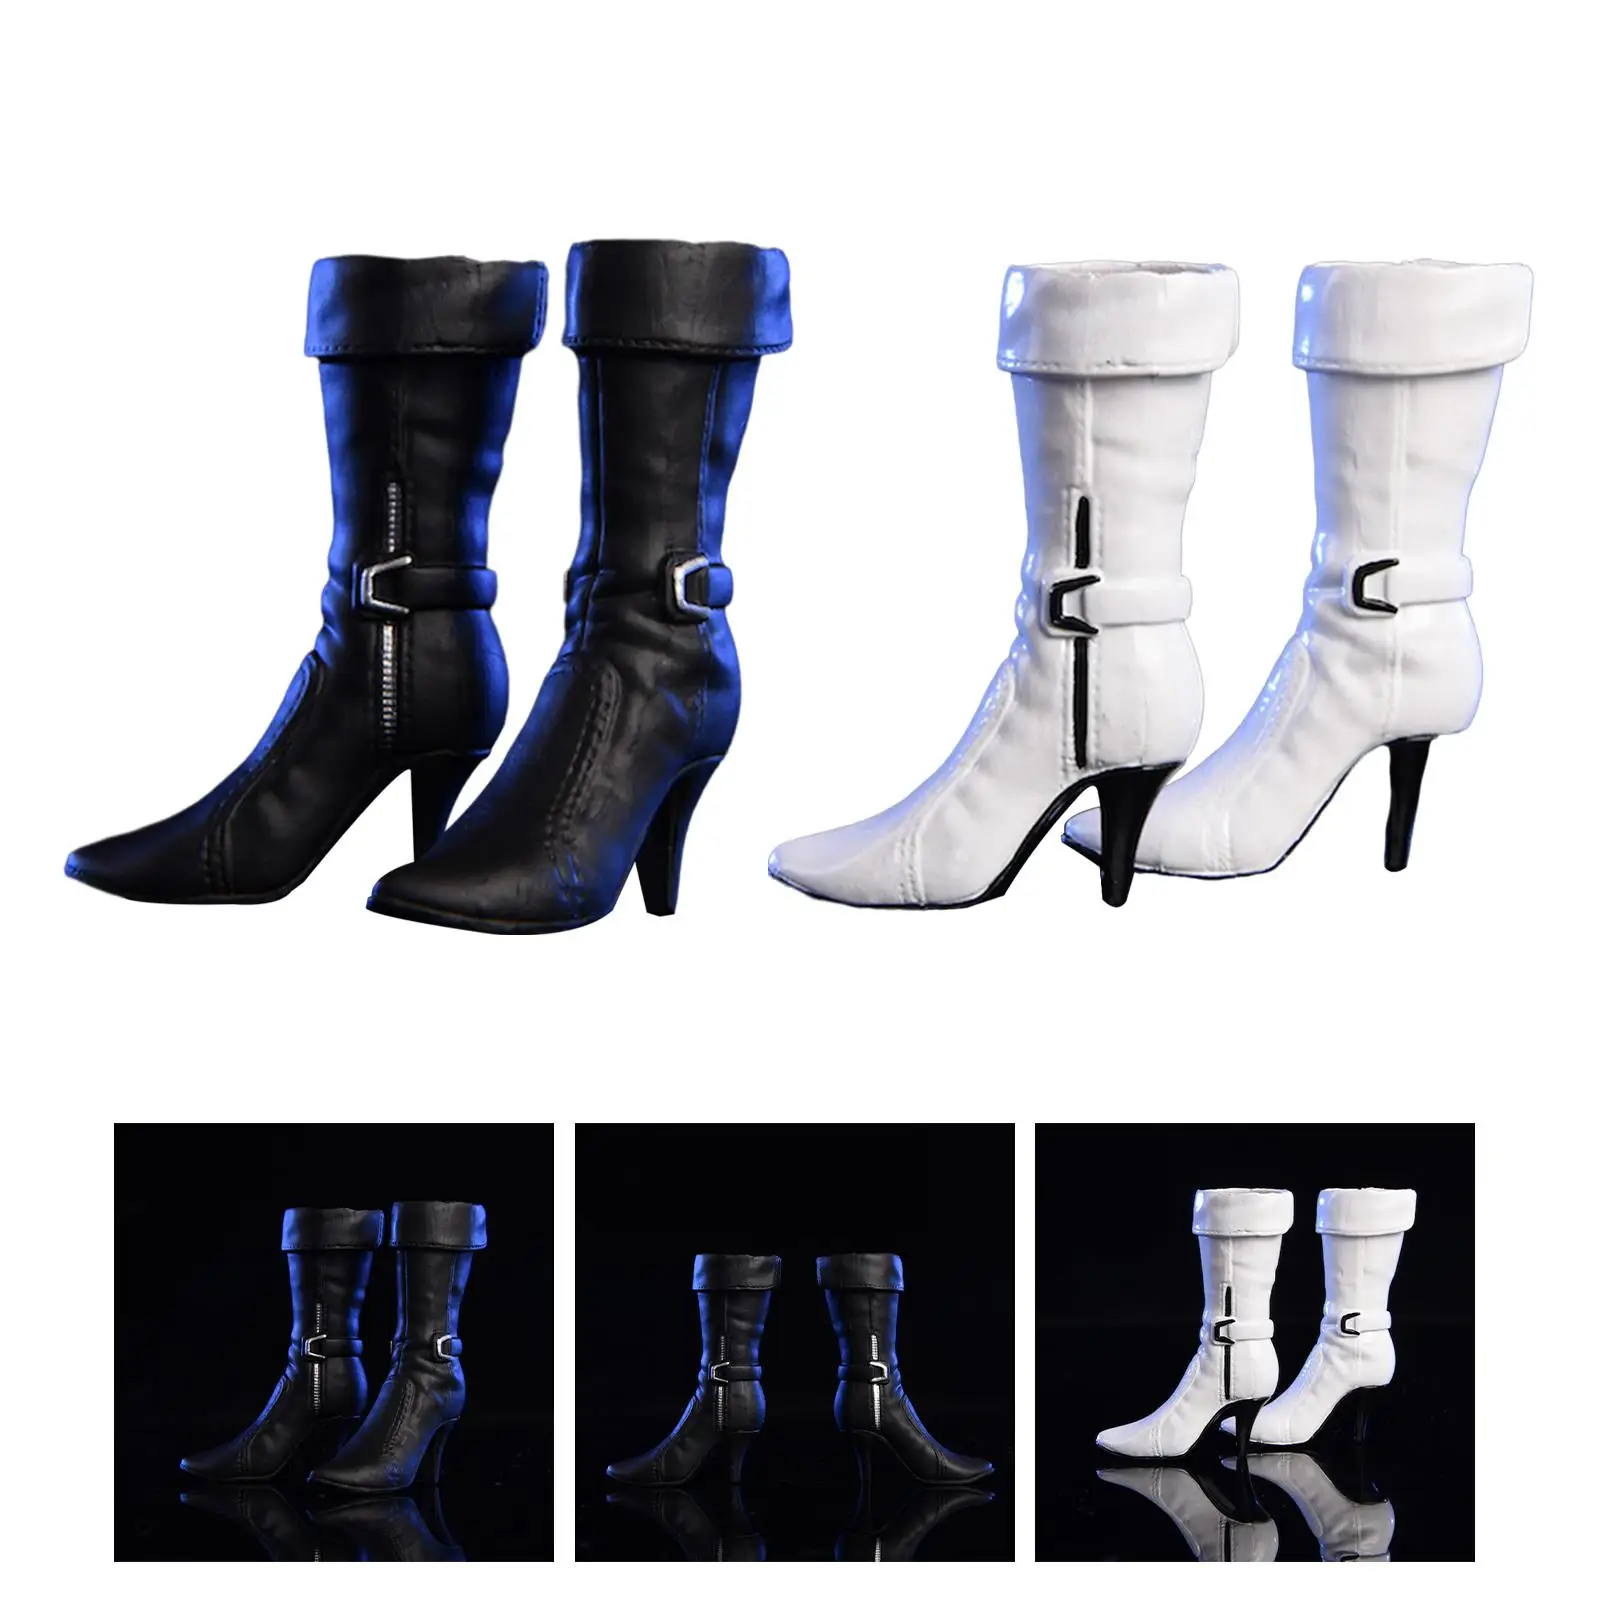 1/6 Scale Figure Shoes Outfits PU Handmade Durable Fashion High Heeled Shoes Doll Accessories for 12 inch Action Figure DIY Gift